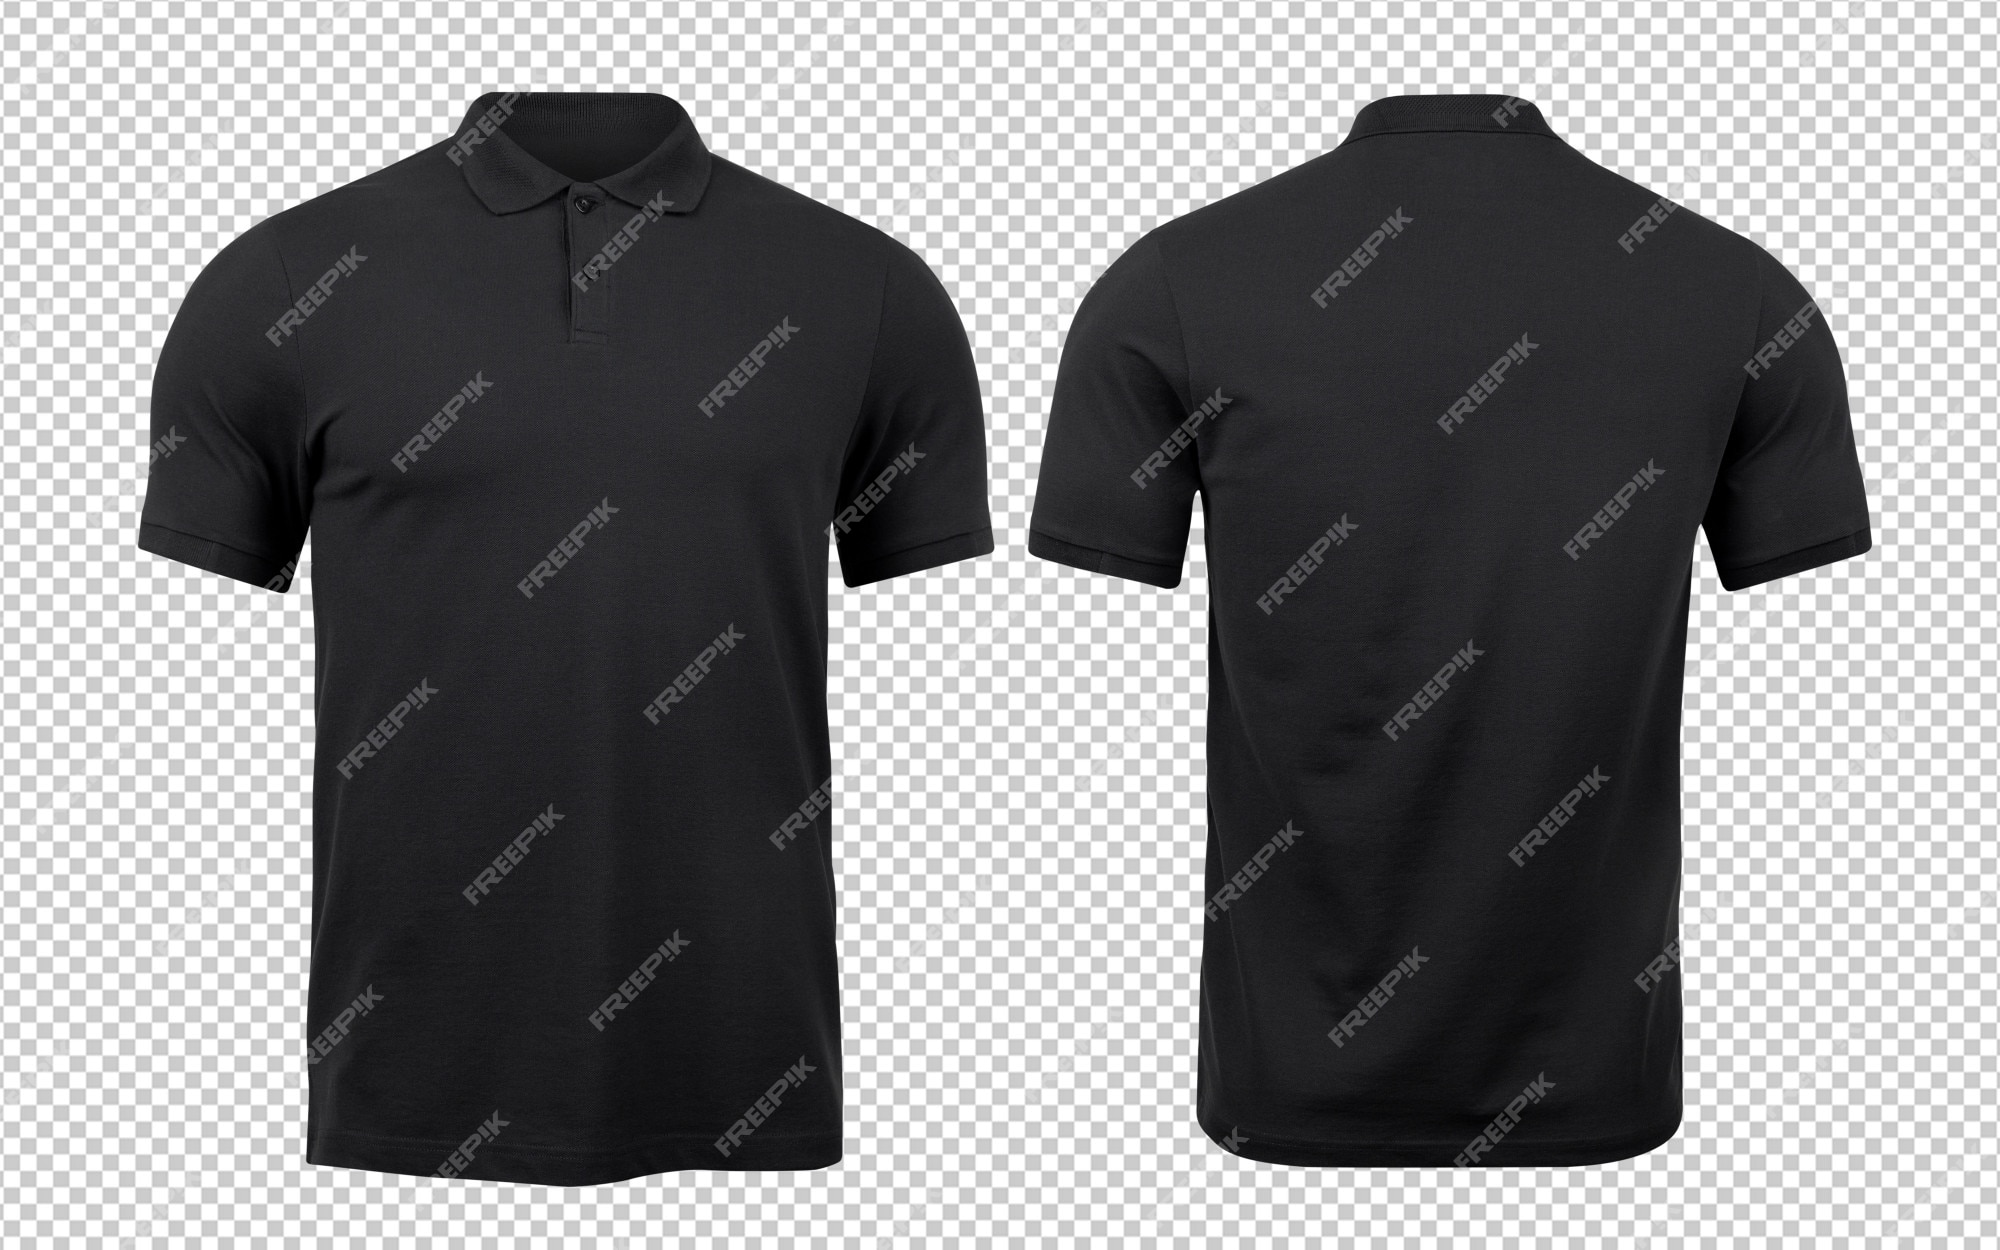 Premium PSD | Black polo mockup front and back used as design template.